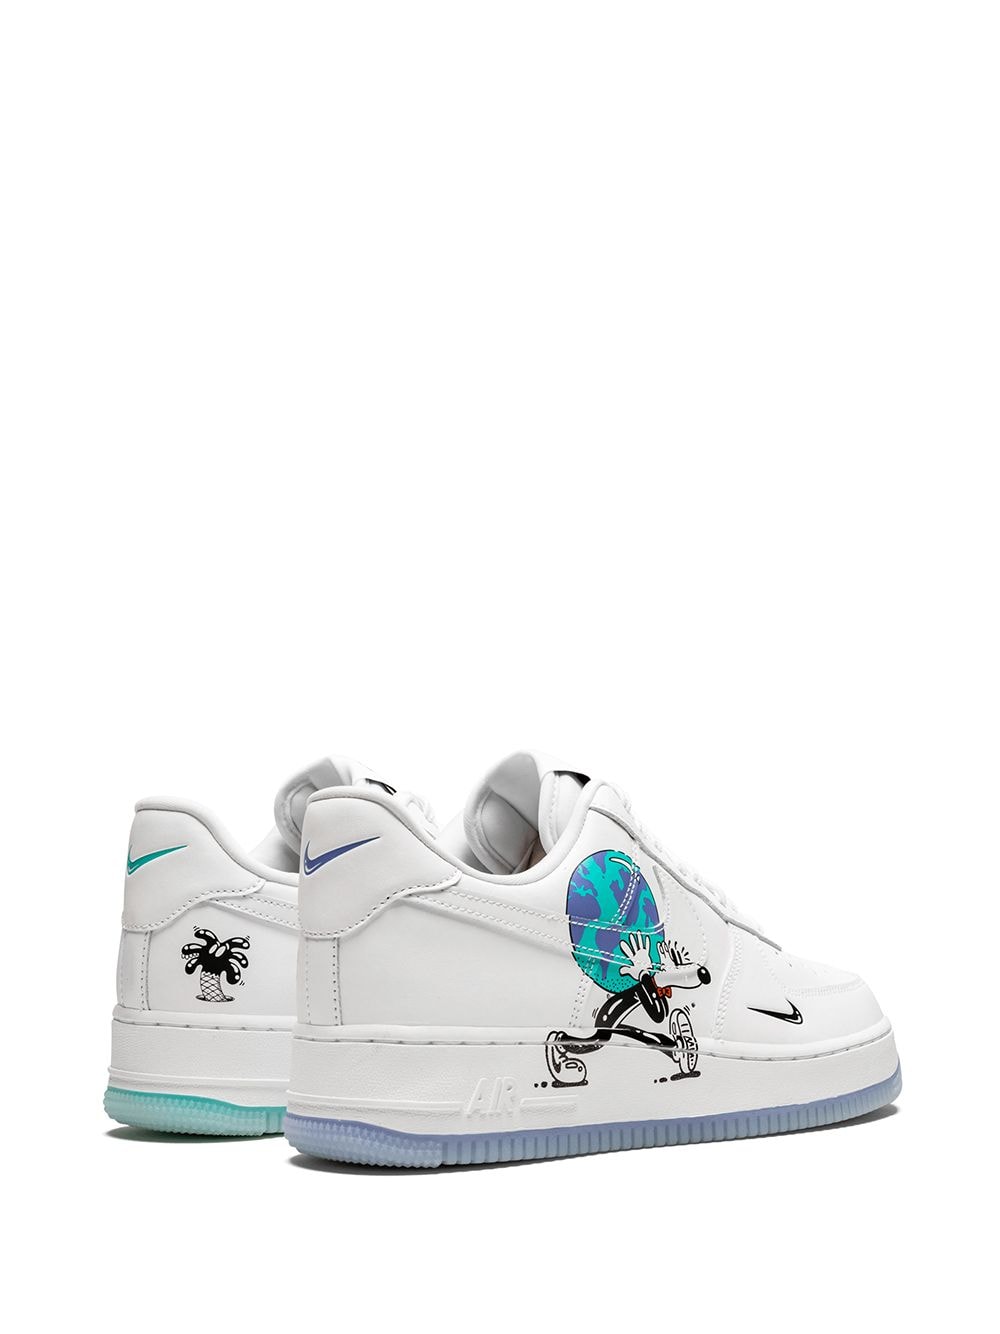 Air Force 1 Flyleather QS "Earth Day" Sneakers - Farfetch